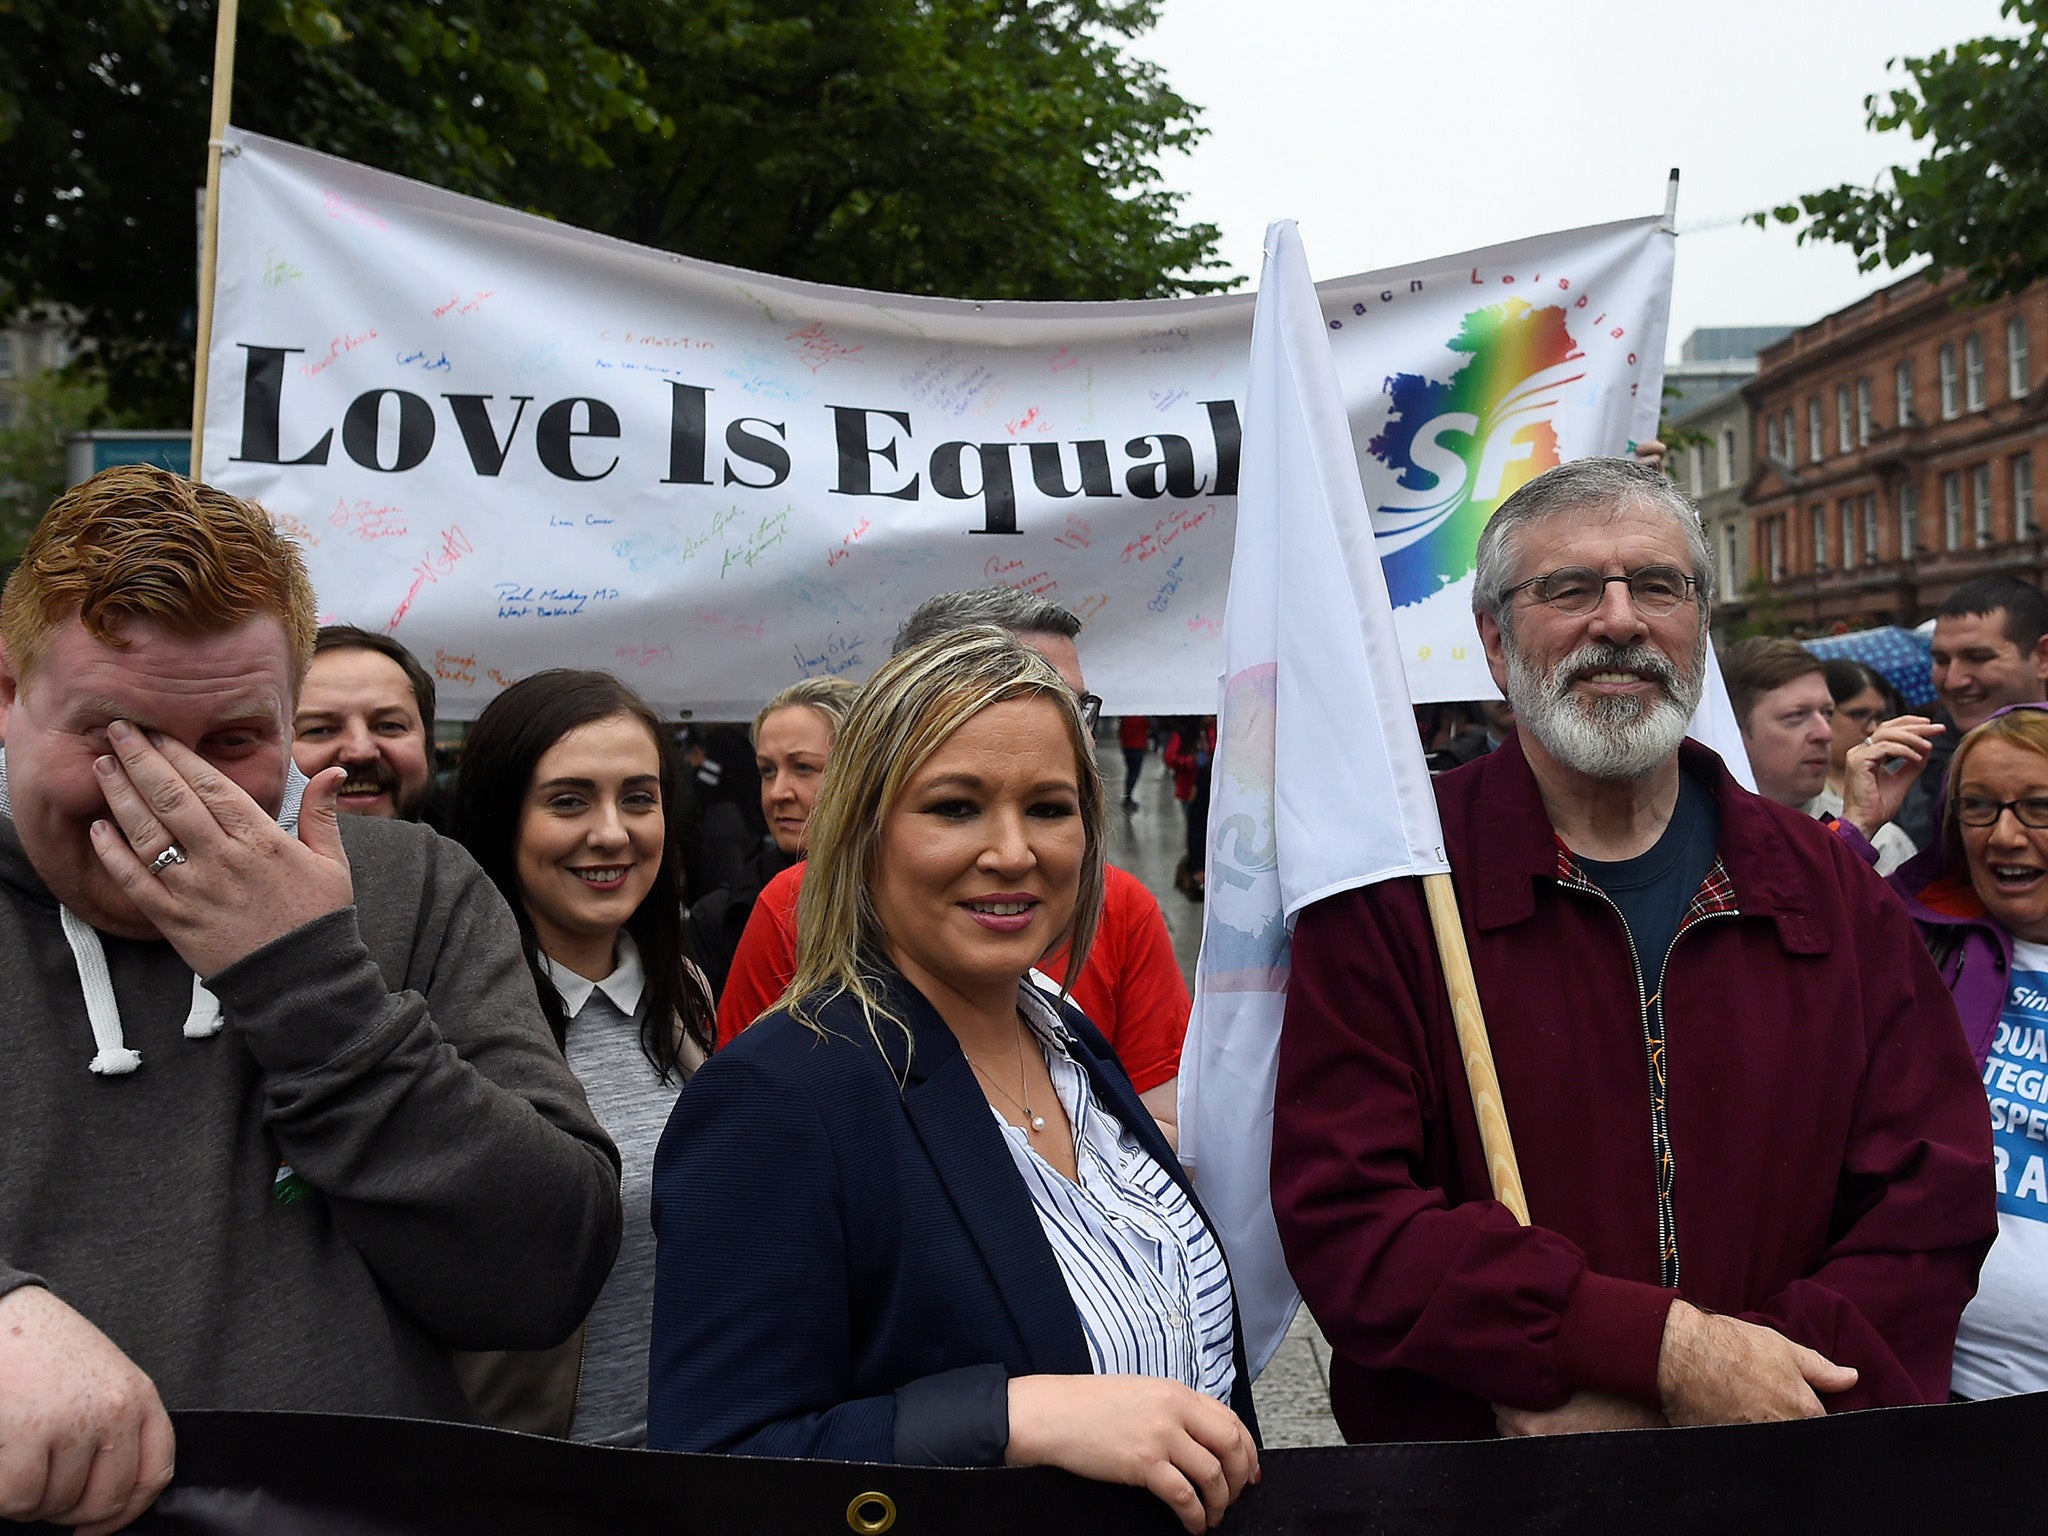 Sinn Fein President, Gerry Adams, and the leader of Sinn Fein in Northern Ireland, Michelle O'Neill, join marriage equality demonstrators in Belfast